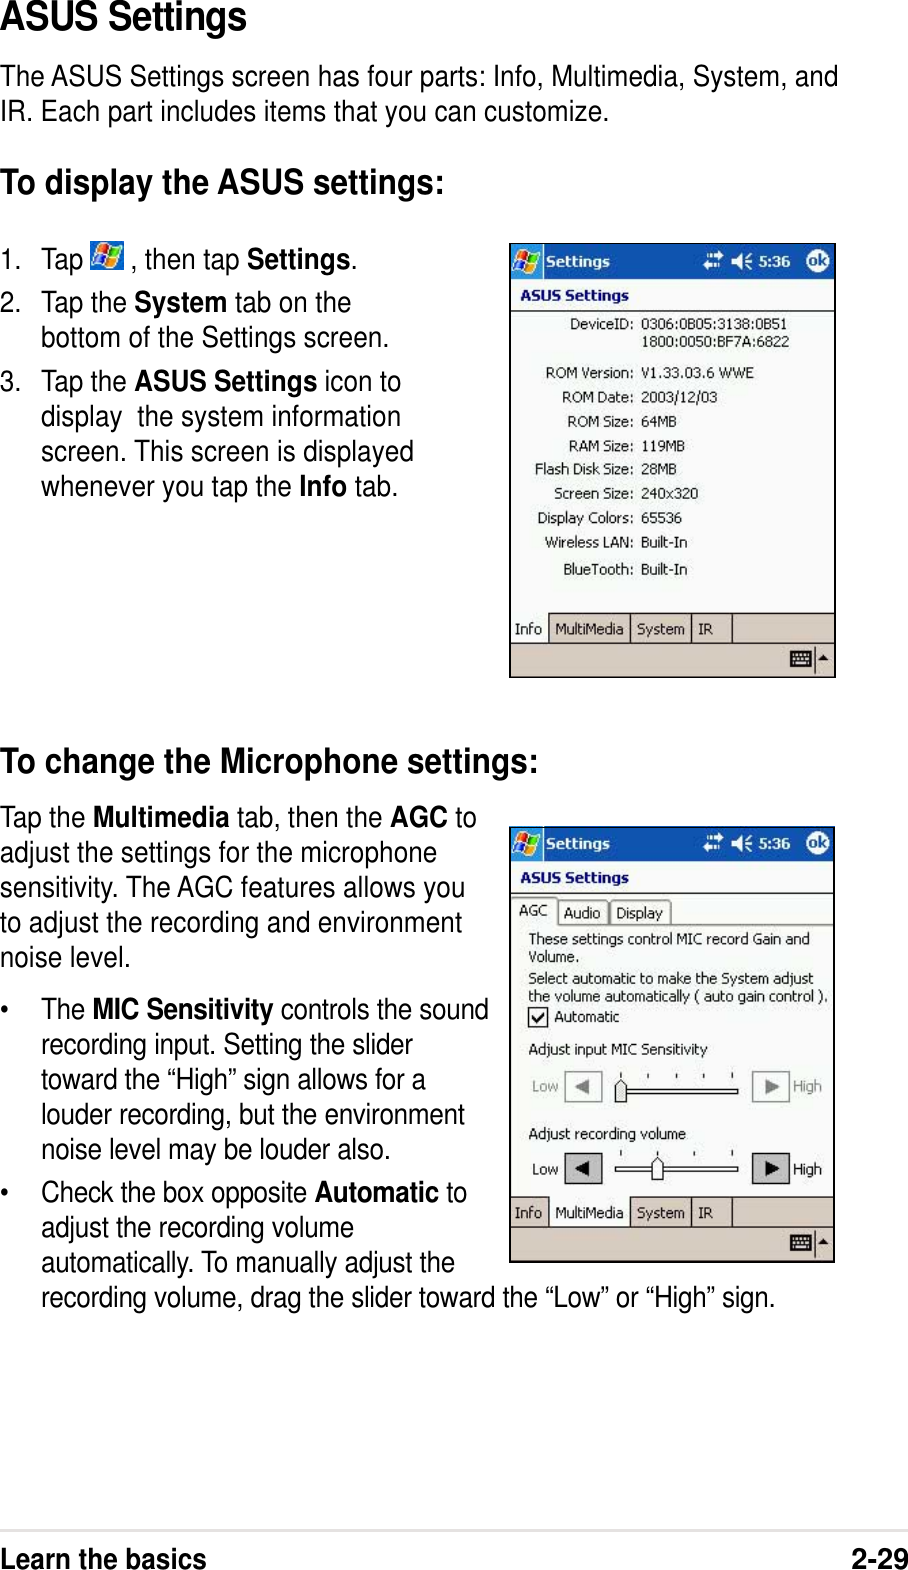 Learn the basics2-291. Tap   , then tap Settings.2. Tap the System tab on thebottom of the Settings screen.3. Tap the ASUS Settings icon todisplay  the system informationscreen. This screen is displayedwhenever you tap the Info tab.ASUS SettingsThe ASUS Settings screen has four parts: Info, Multimedia, System, andIR. Each part includes items that you can customize.To display the ASUS settings:To change the Microphone settings:Tap the Multimedia tab, then the AGC toadjust the settings for the microphonesensitivity. The AGC features allows youto adjust the recording and environmentnoise level.•The MIC Sensitivity controls the soundrecording input. Setting the slidertoward the “High” sign allows for alouder recording, but the environmentnoise level may be louder also.•Check the box opposite Automatic toadjust the recording volumeautomatically. To manually adjust therecording volume, drag the slider toward the “Low” or “High” sign.